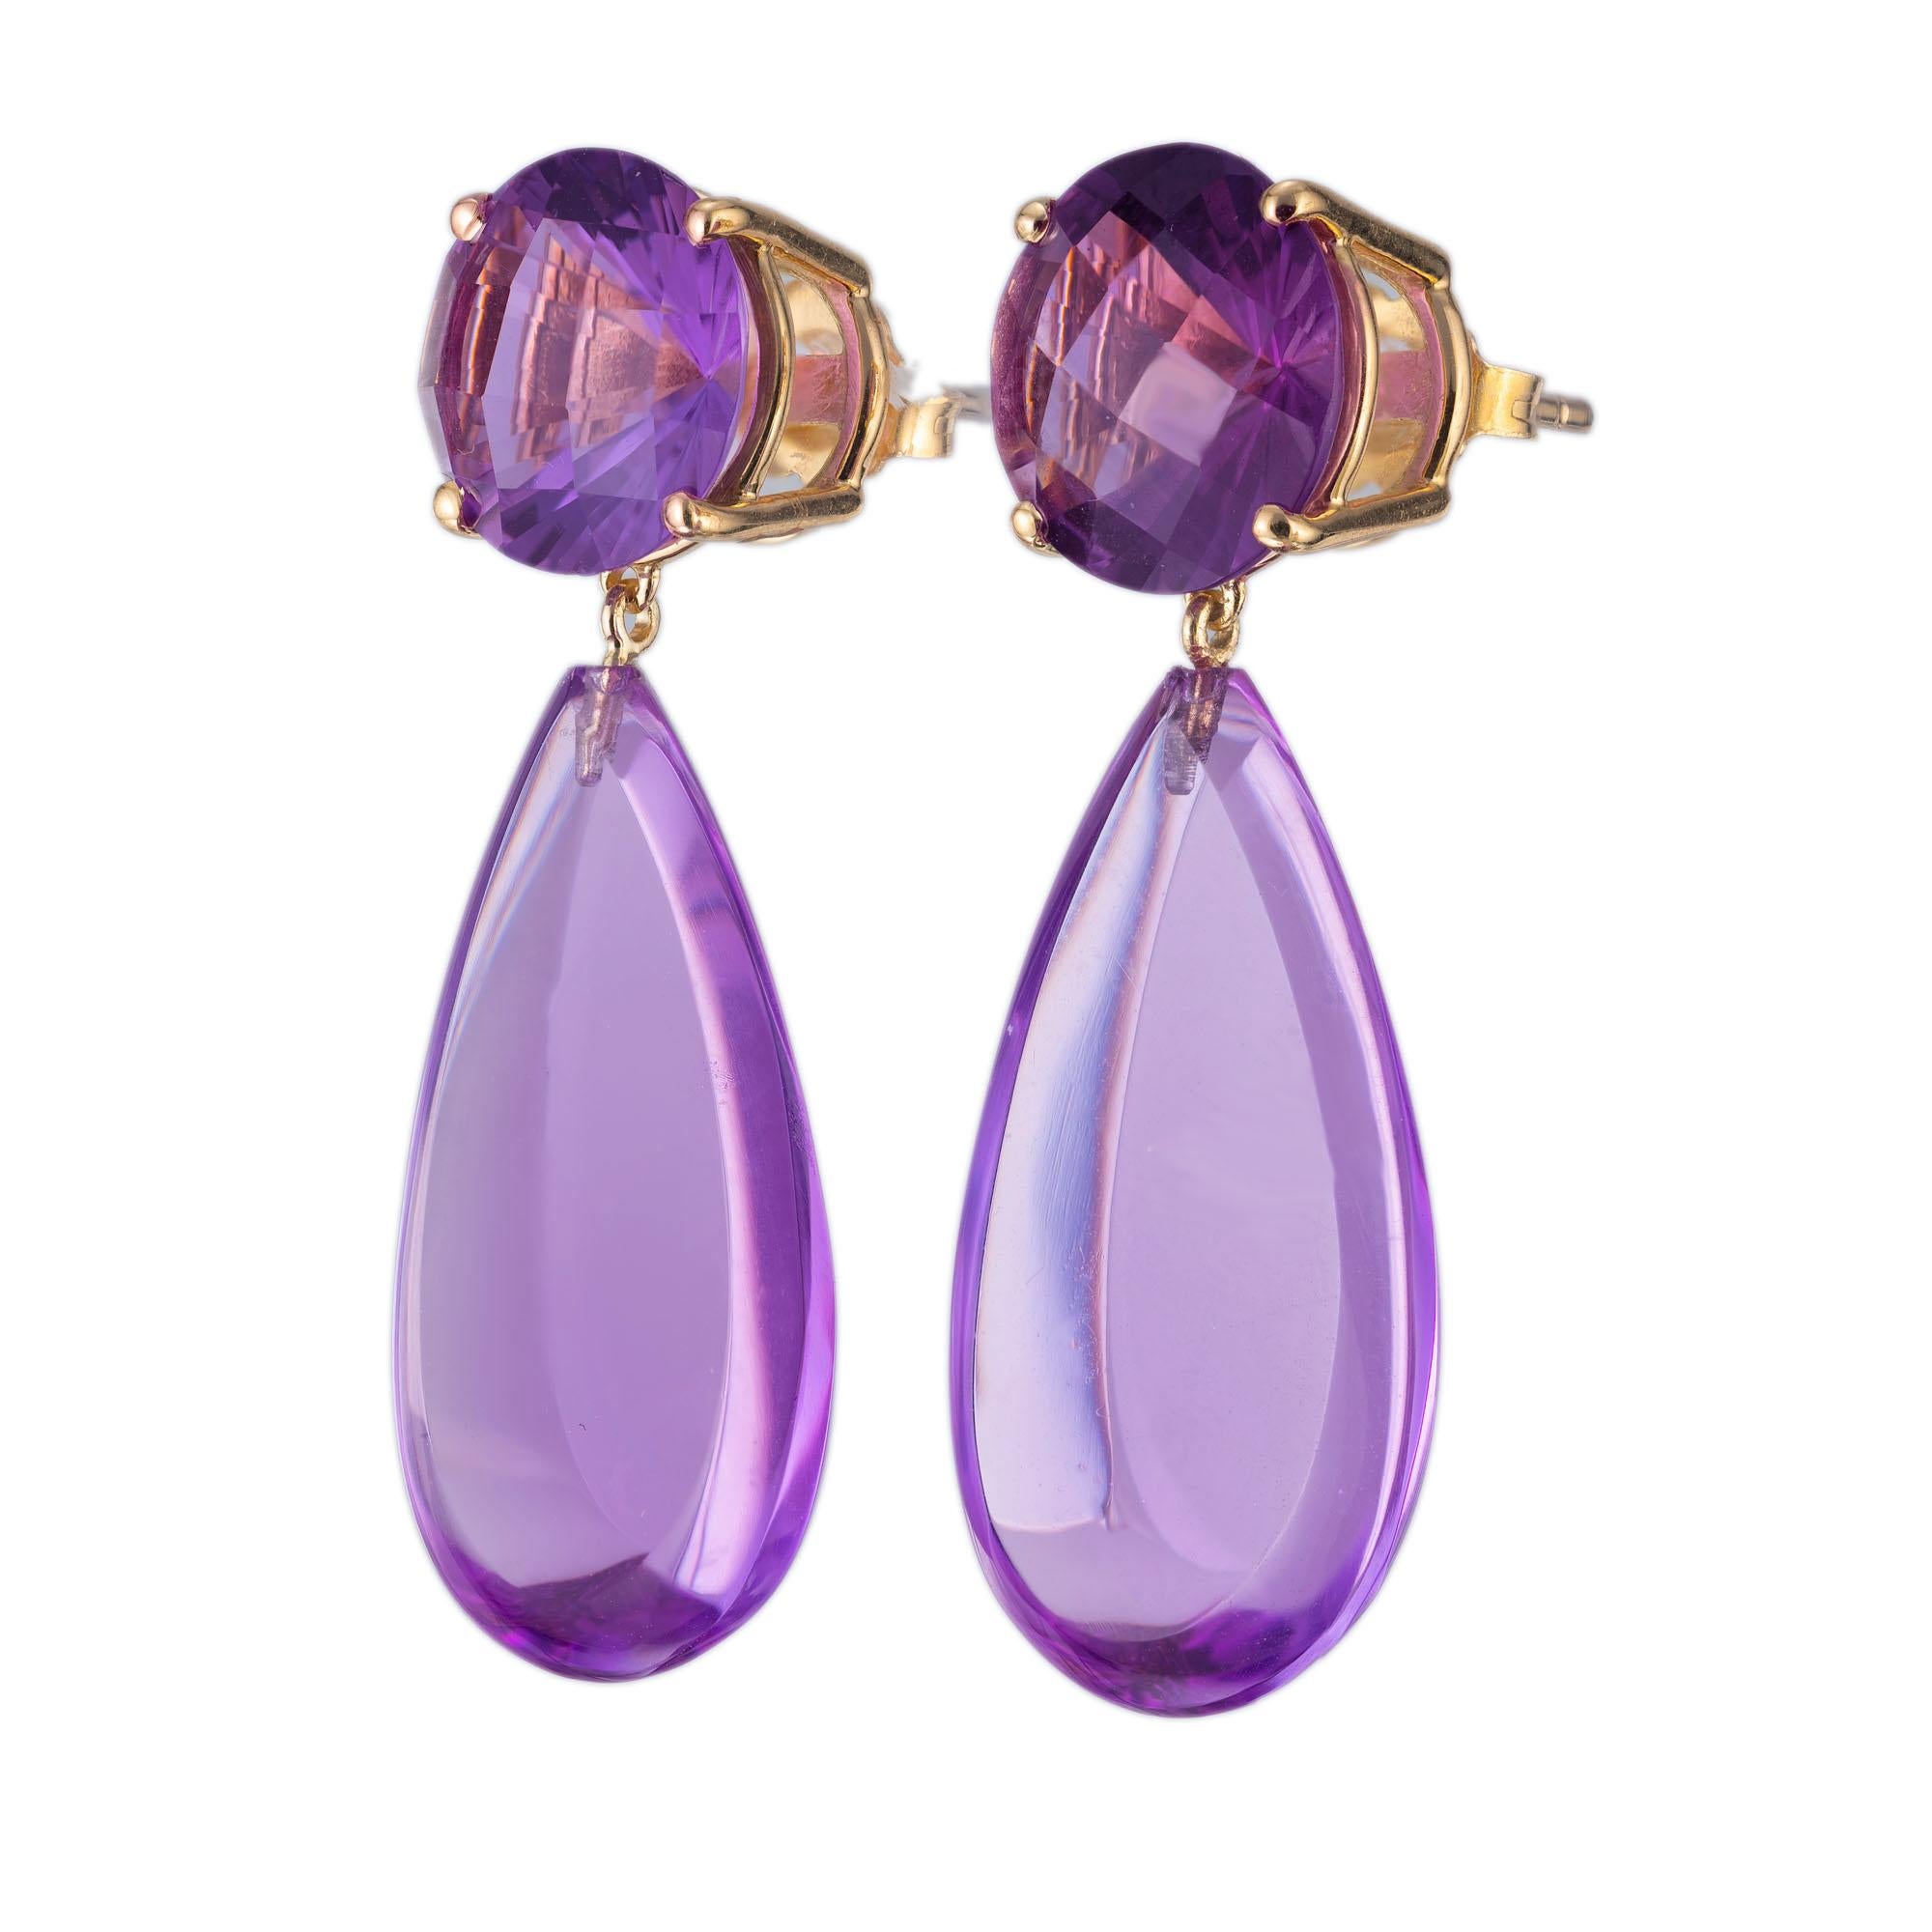 Custom cut natural amethyst dangle earrings. Two round cut amethyst tops with two pear shaped amethyst dangles set in 18k yellow gold. Crafted in the Peter Suchy Workshop. 

2 round purple amethyst, approx. 6.00cts
2 pear shape flat purple cabochon